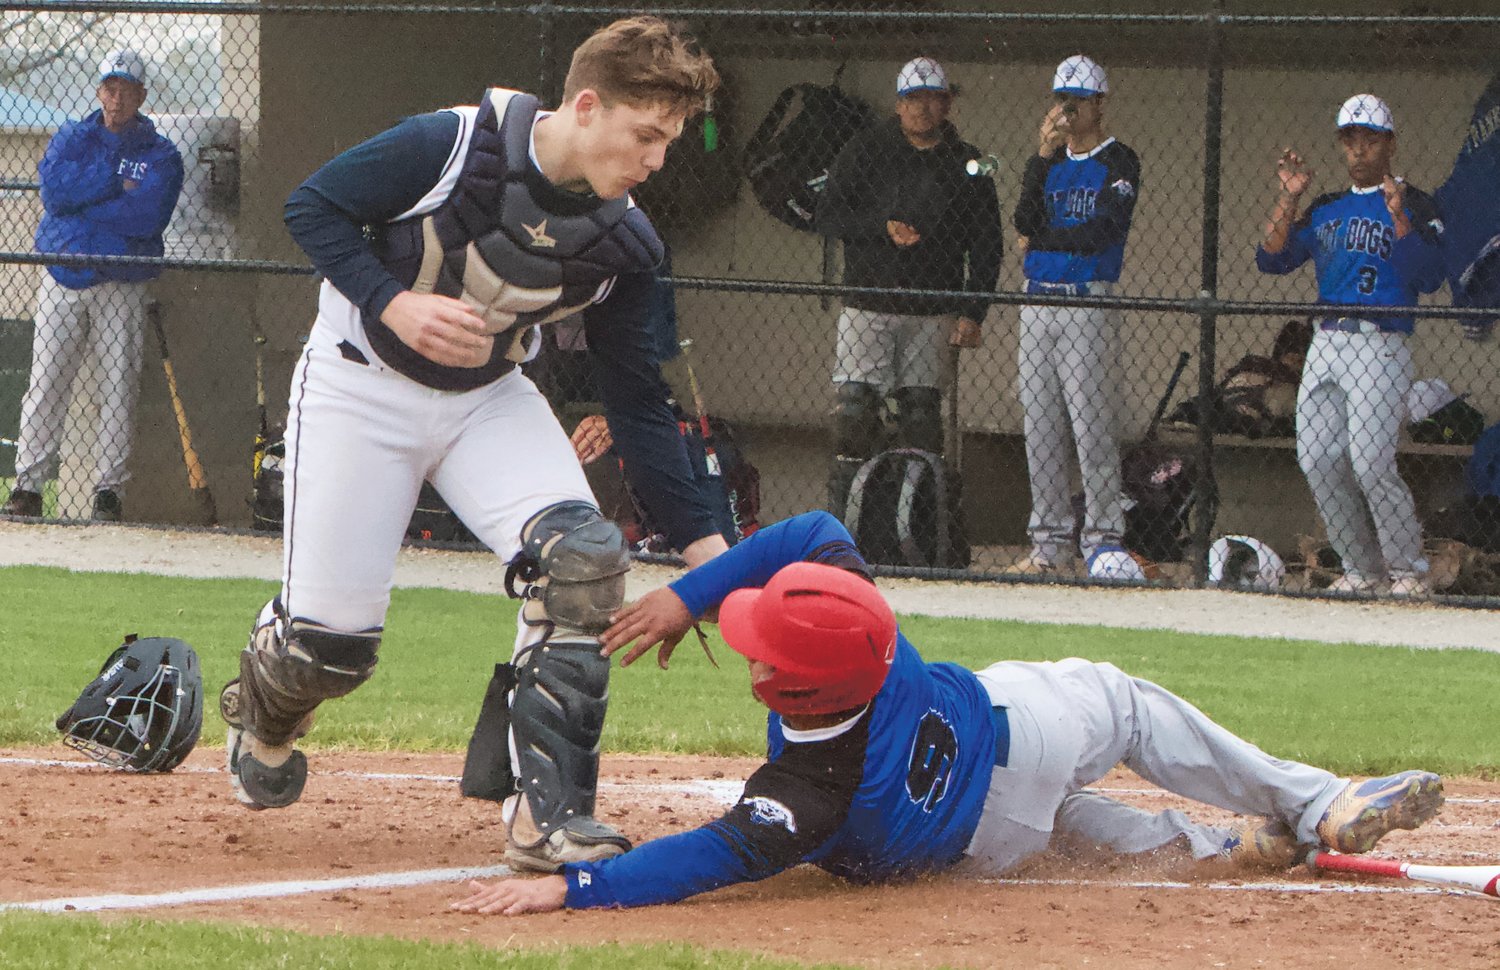 North Montgomery's Jacob Braun tags out a Frankfort player trying to score back in 2019.